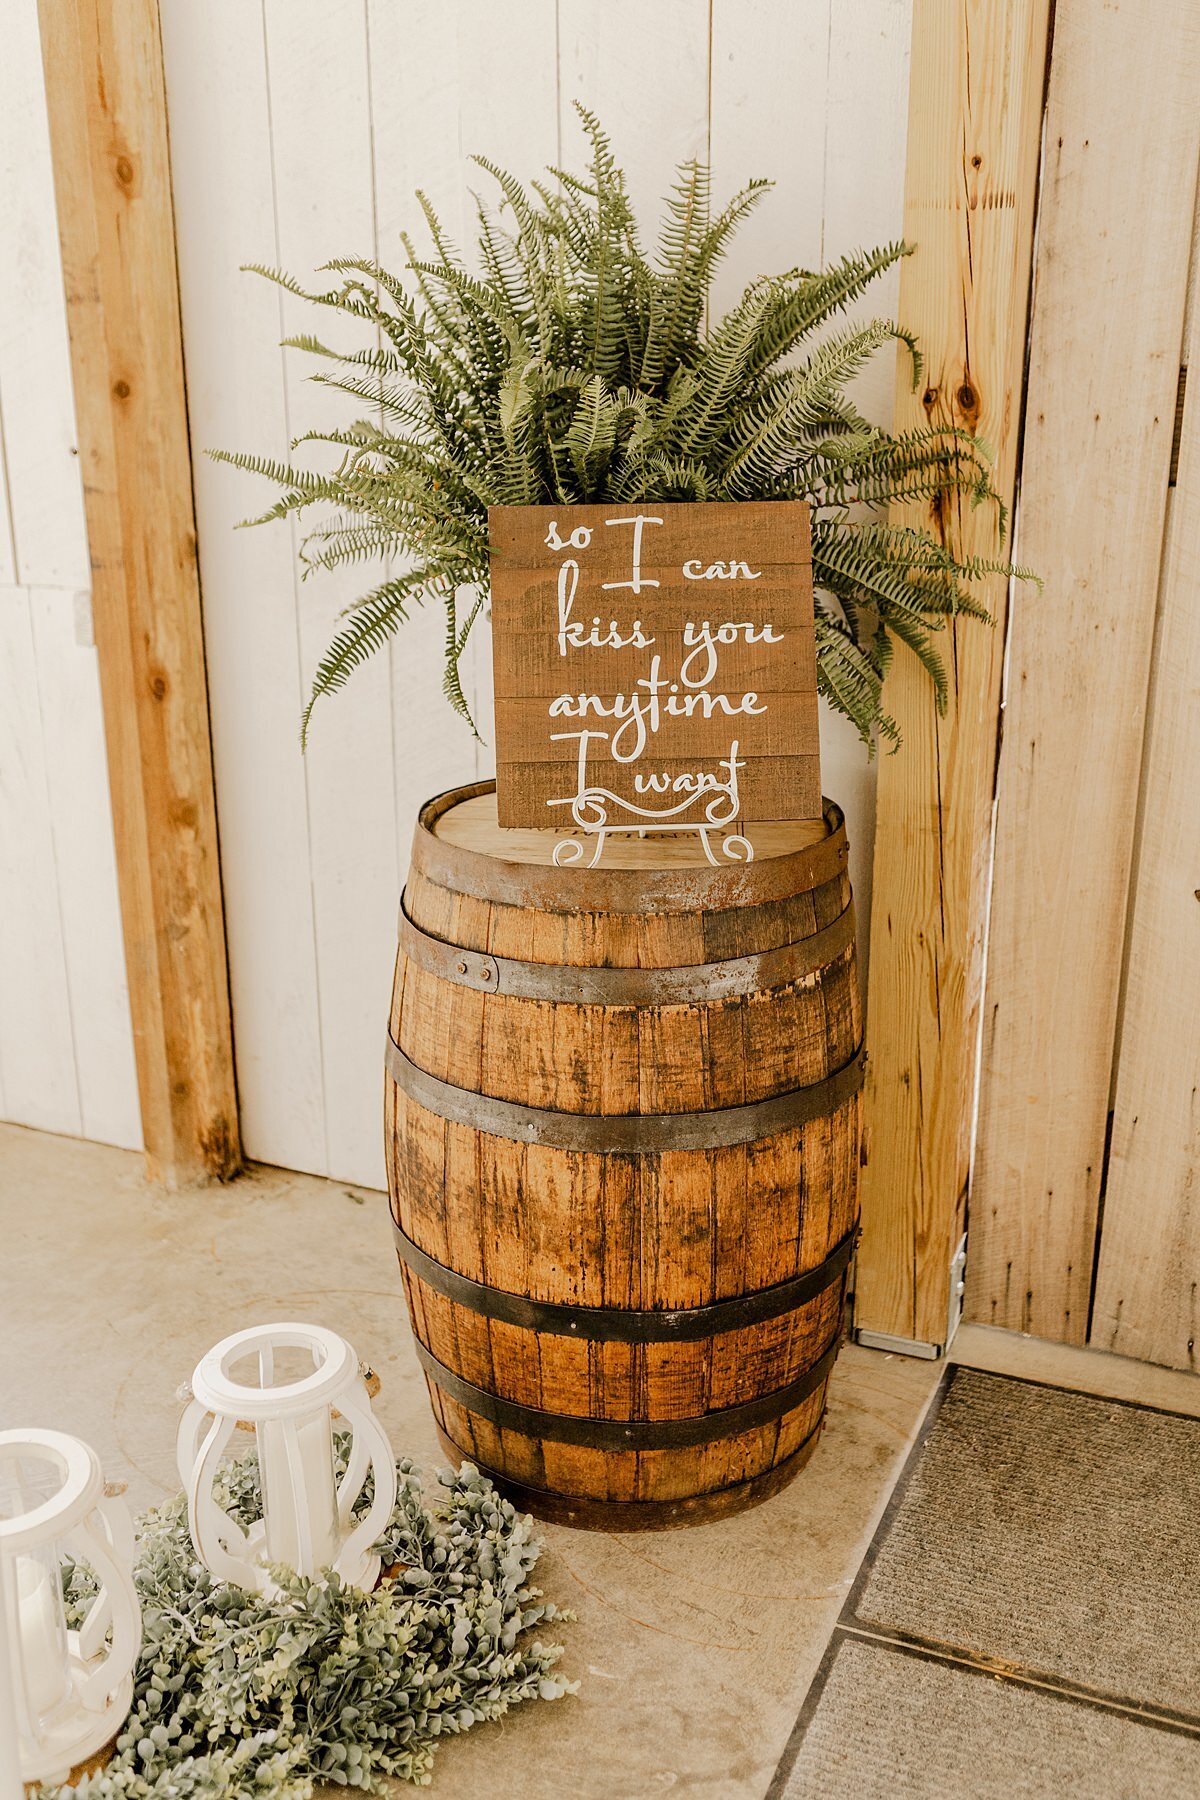 A wine barrel topped with a large green fern inside a white barn had a barn wood sign with a quote from Sweet Home Alabama. Beside the wine barrel are two white lanterns wreathed in greenery.